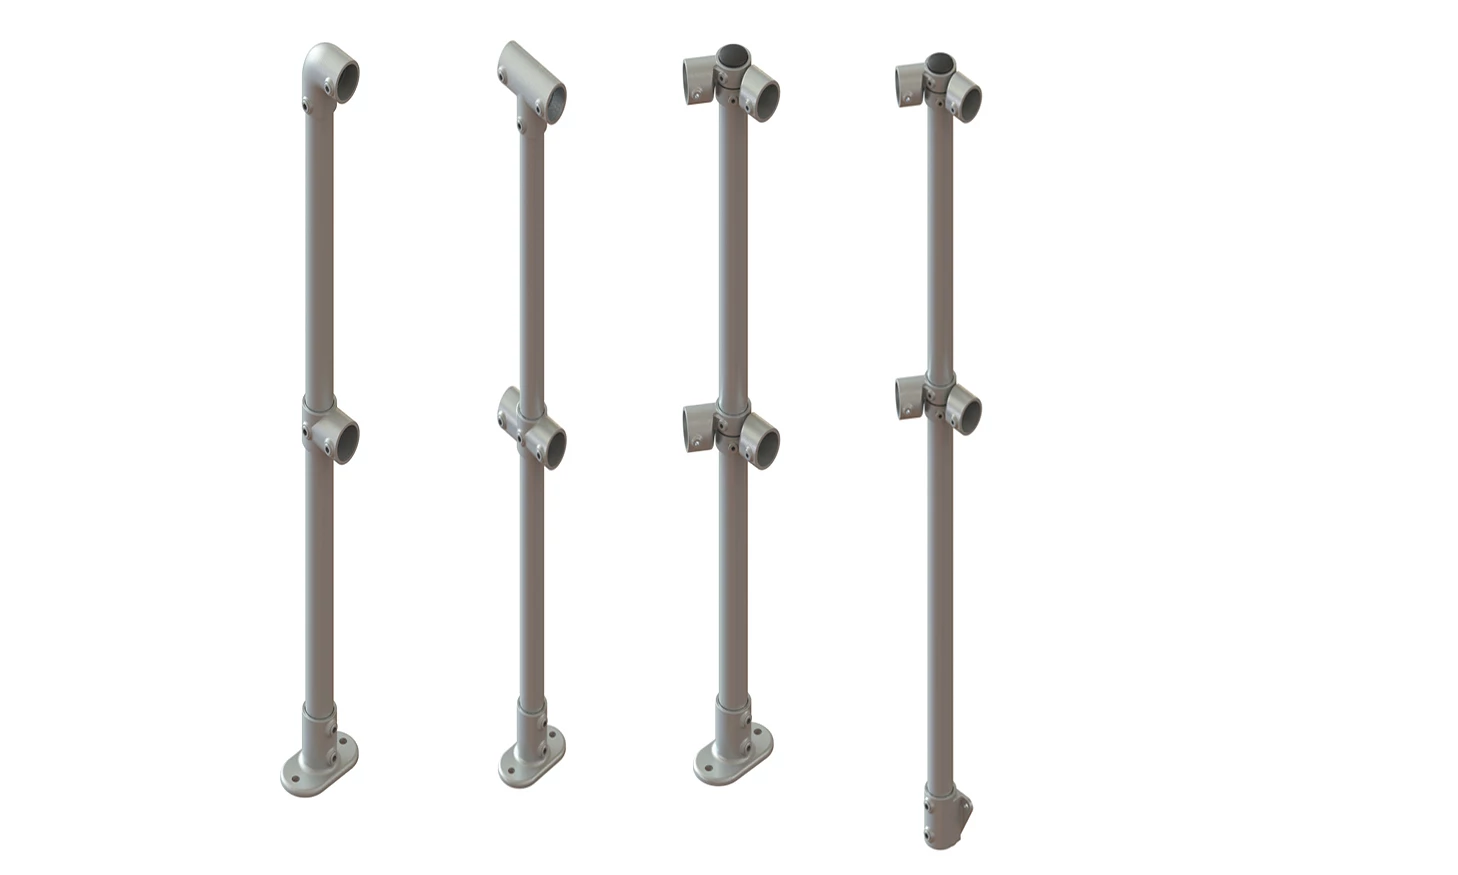 Kee Klamp Pre-assembled Upright | Kee Klamp Pre-constructed Handrail Post | Preassembled post for handrail